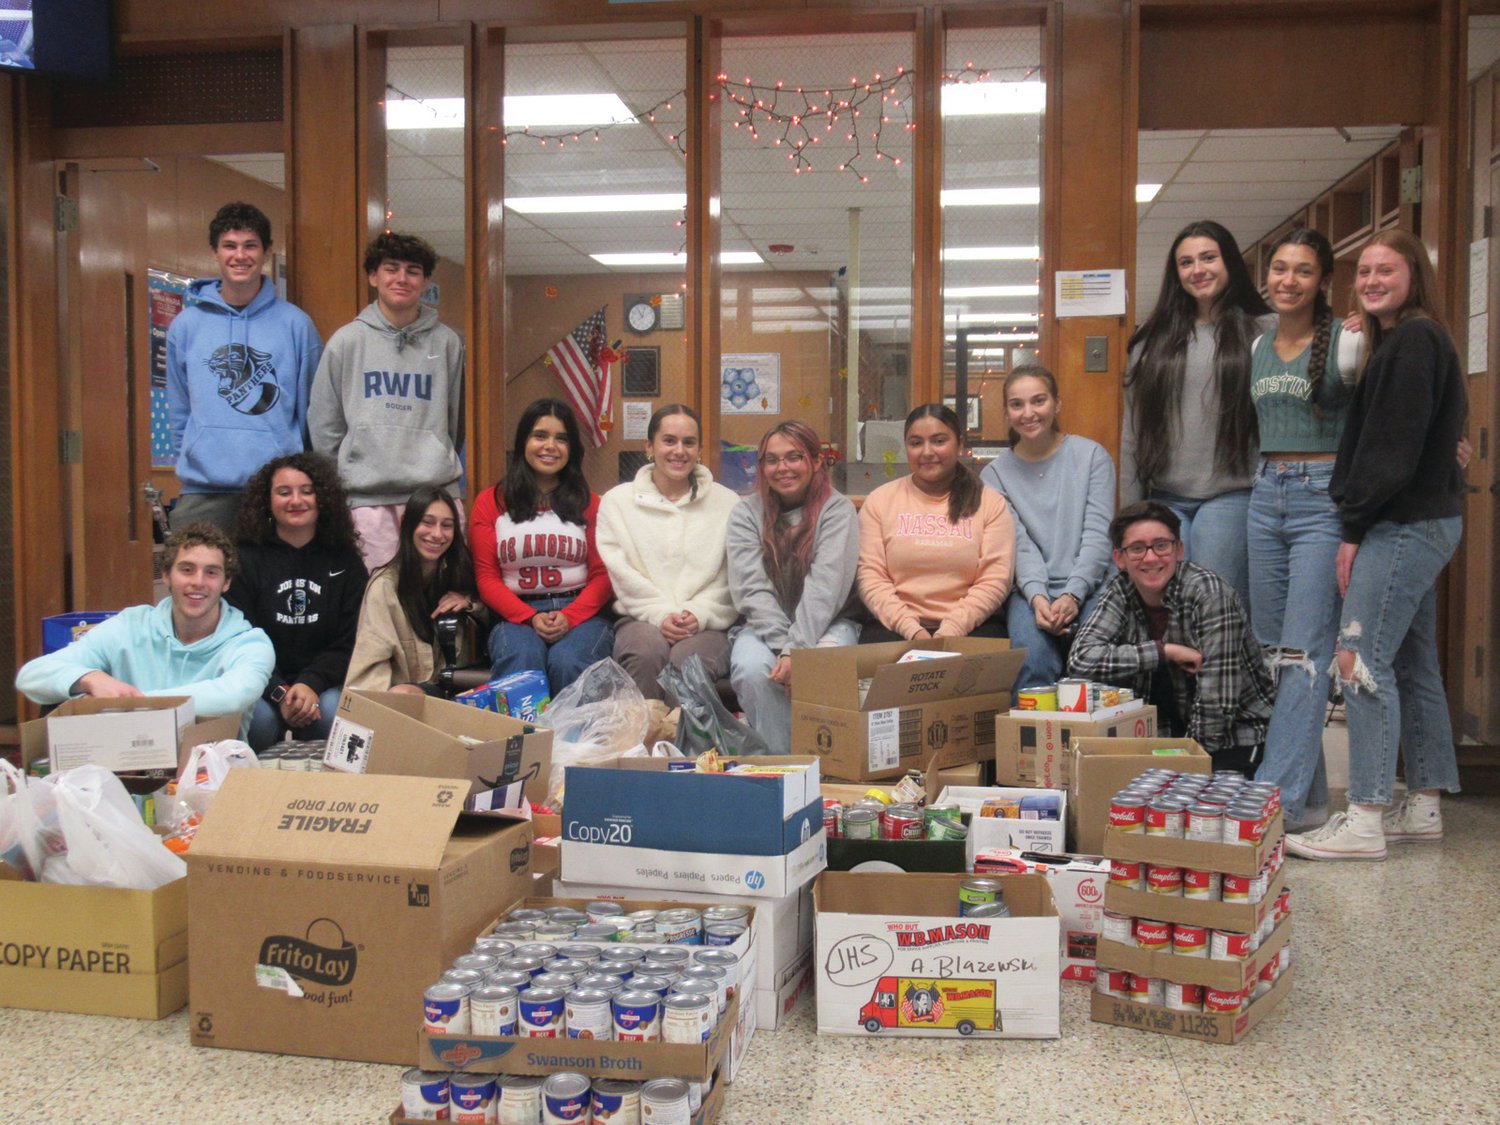 PROUD PANTHERS: The JHS students above again upheld a terrific helping collect no n perishable food items that will help needy families. The group includes Derek Salvatore, Josh Philbrick Nicki Aucone, Dylan Robbins, Marilyn Macateer, Jillian Olivia-Garcia, Emily Klein, Michelina Irons, Sierra Jeetan, Hailey Brown, Talia LaFlamme, Arianna Medeiros and Ava Mello.